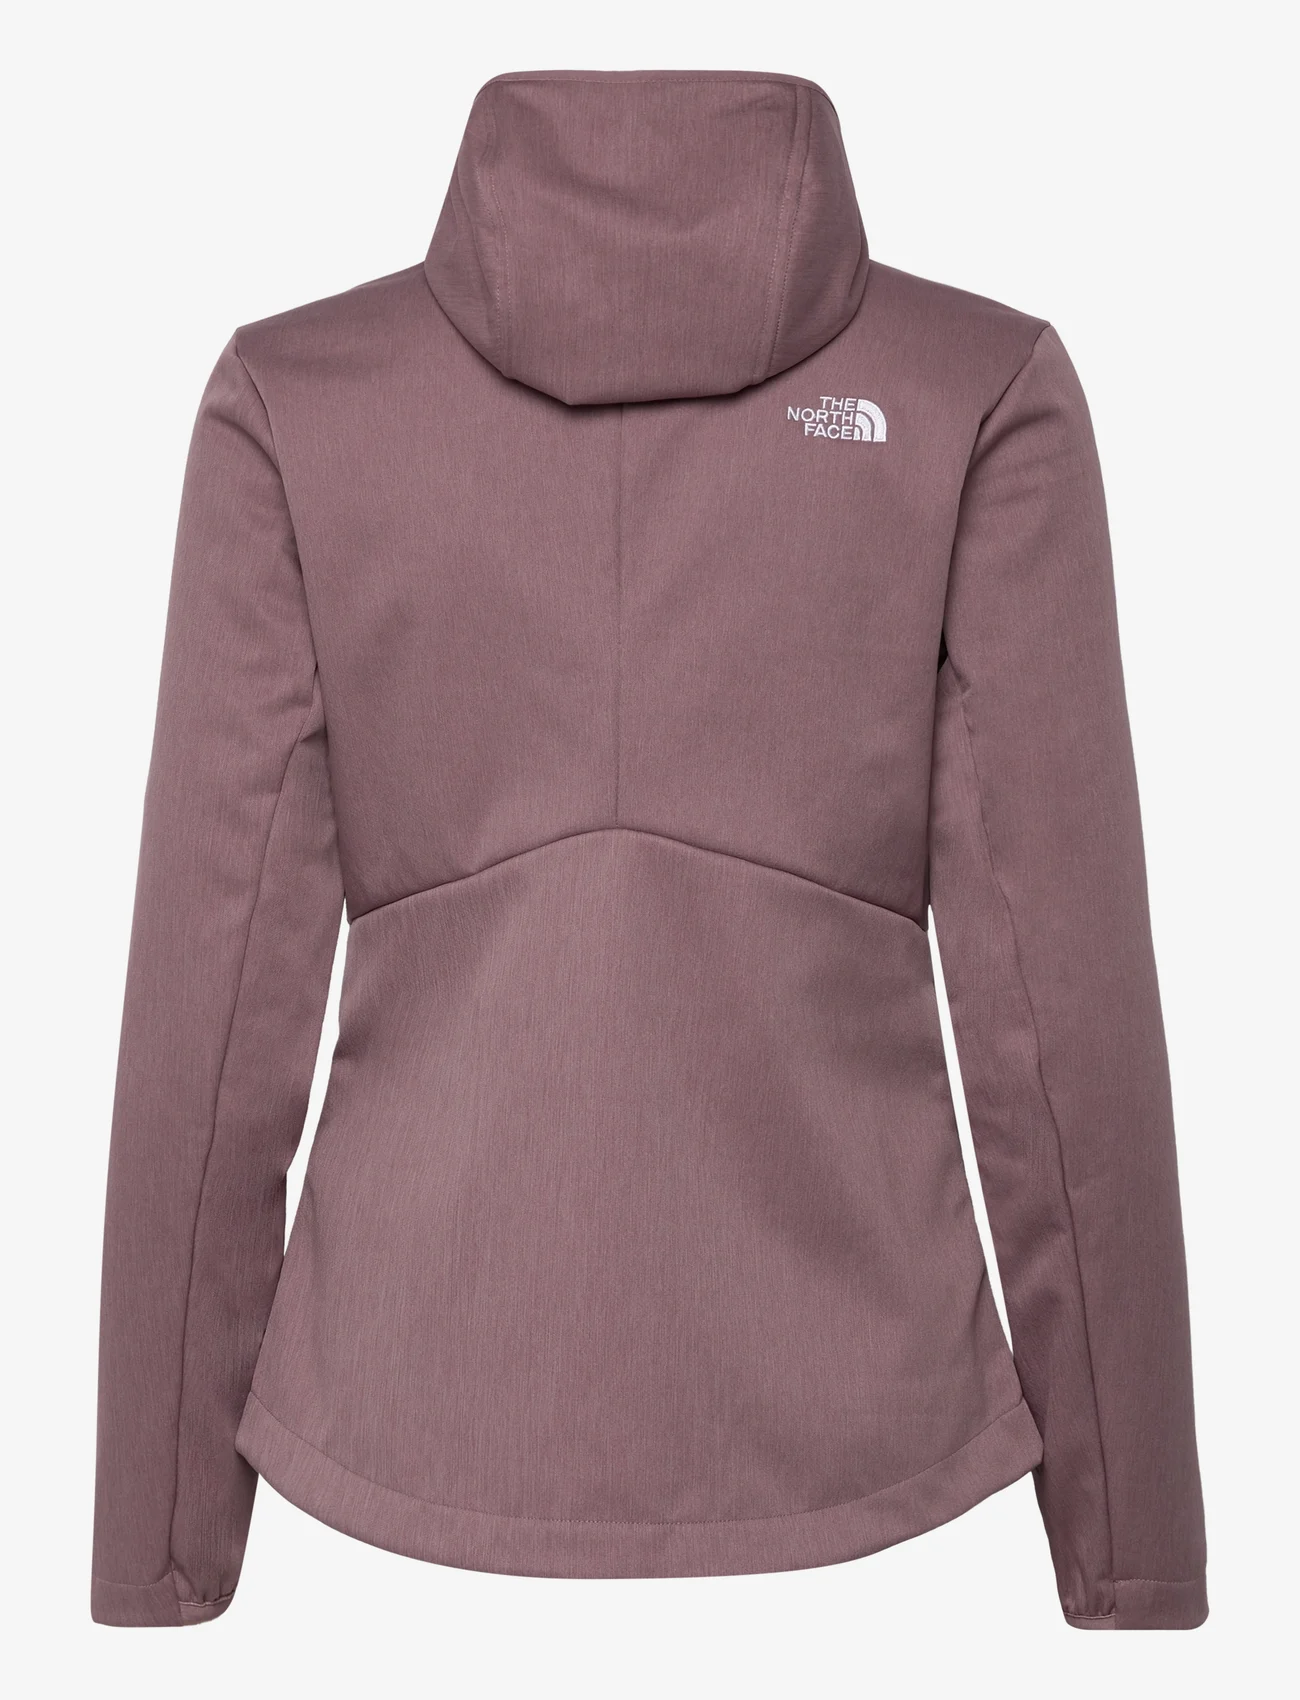 The North Face - W QUEST HIGHLOFT SOFT SHELL JACKET - EU - striukės nuo vėjo - fawn grey heather - 1